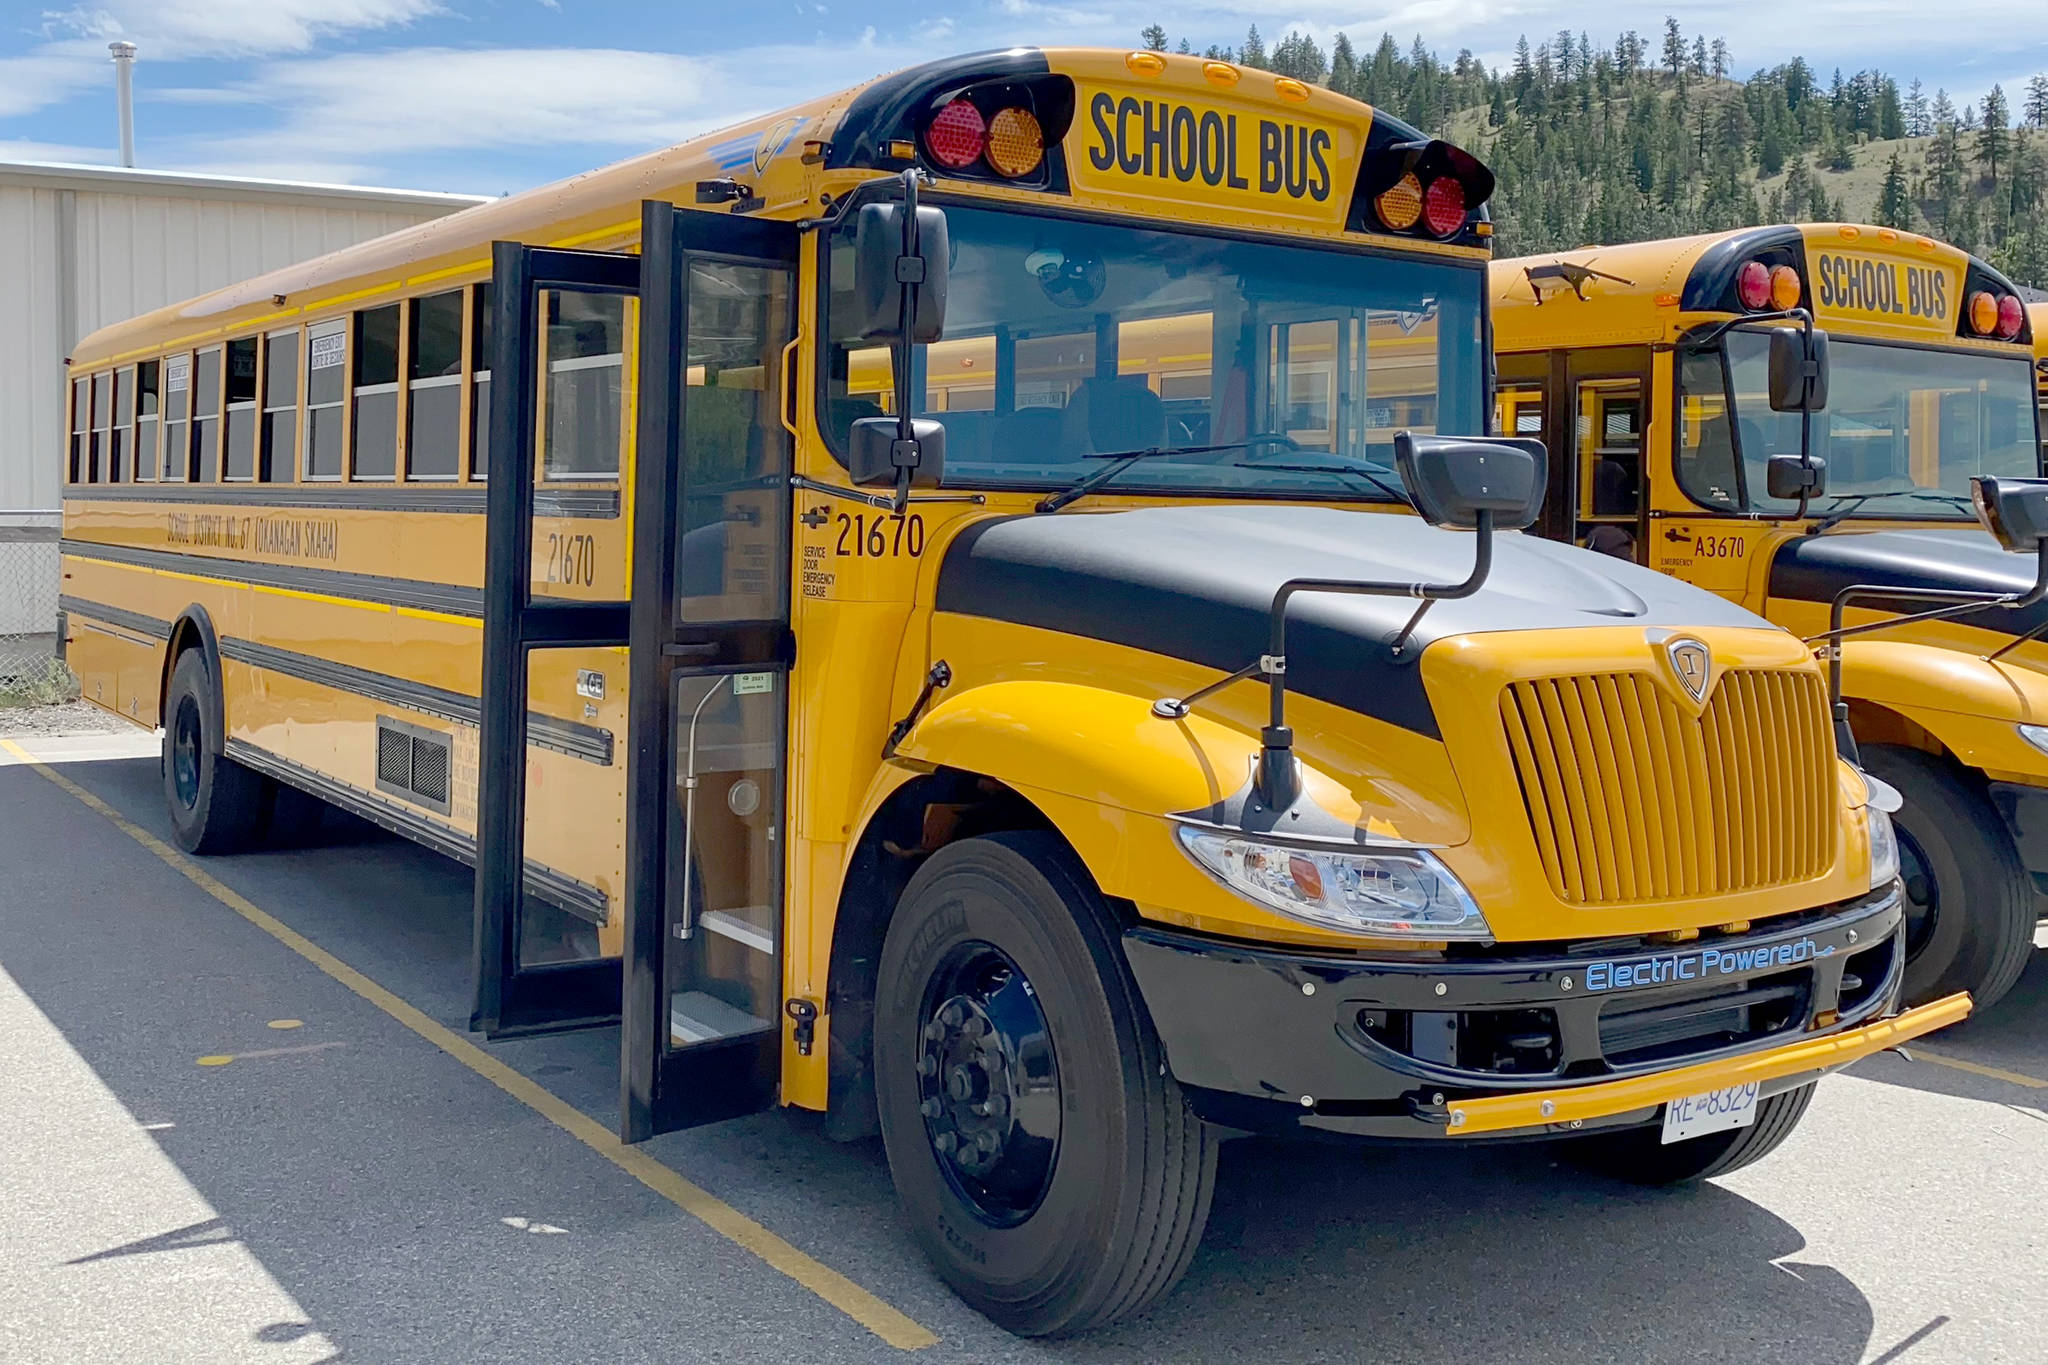 While the Okanagan Shaka School District’s new electric bus looks much like conventional diesel buses, the technology powering the vehicle is different. The bus is at the Summerland Yard and will be used on bus routes in Summerland. (John Arendt - Summerland Review)